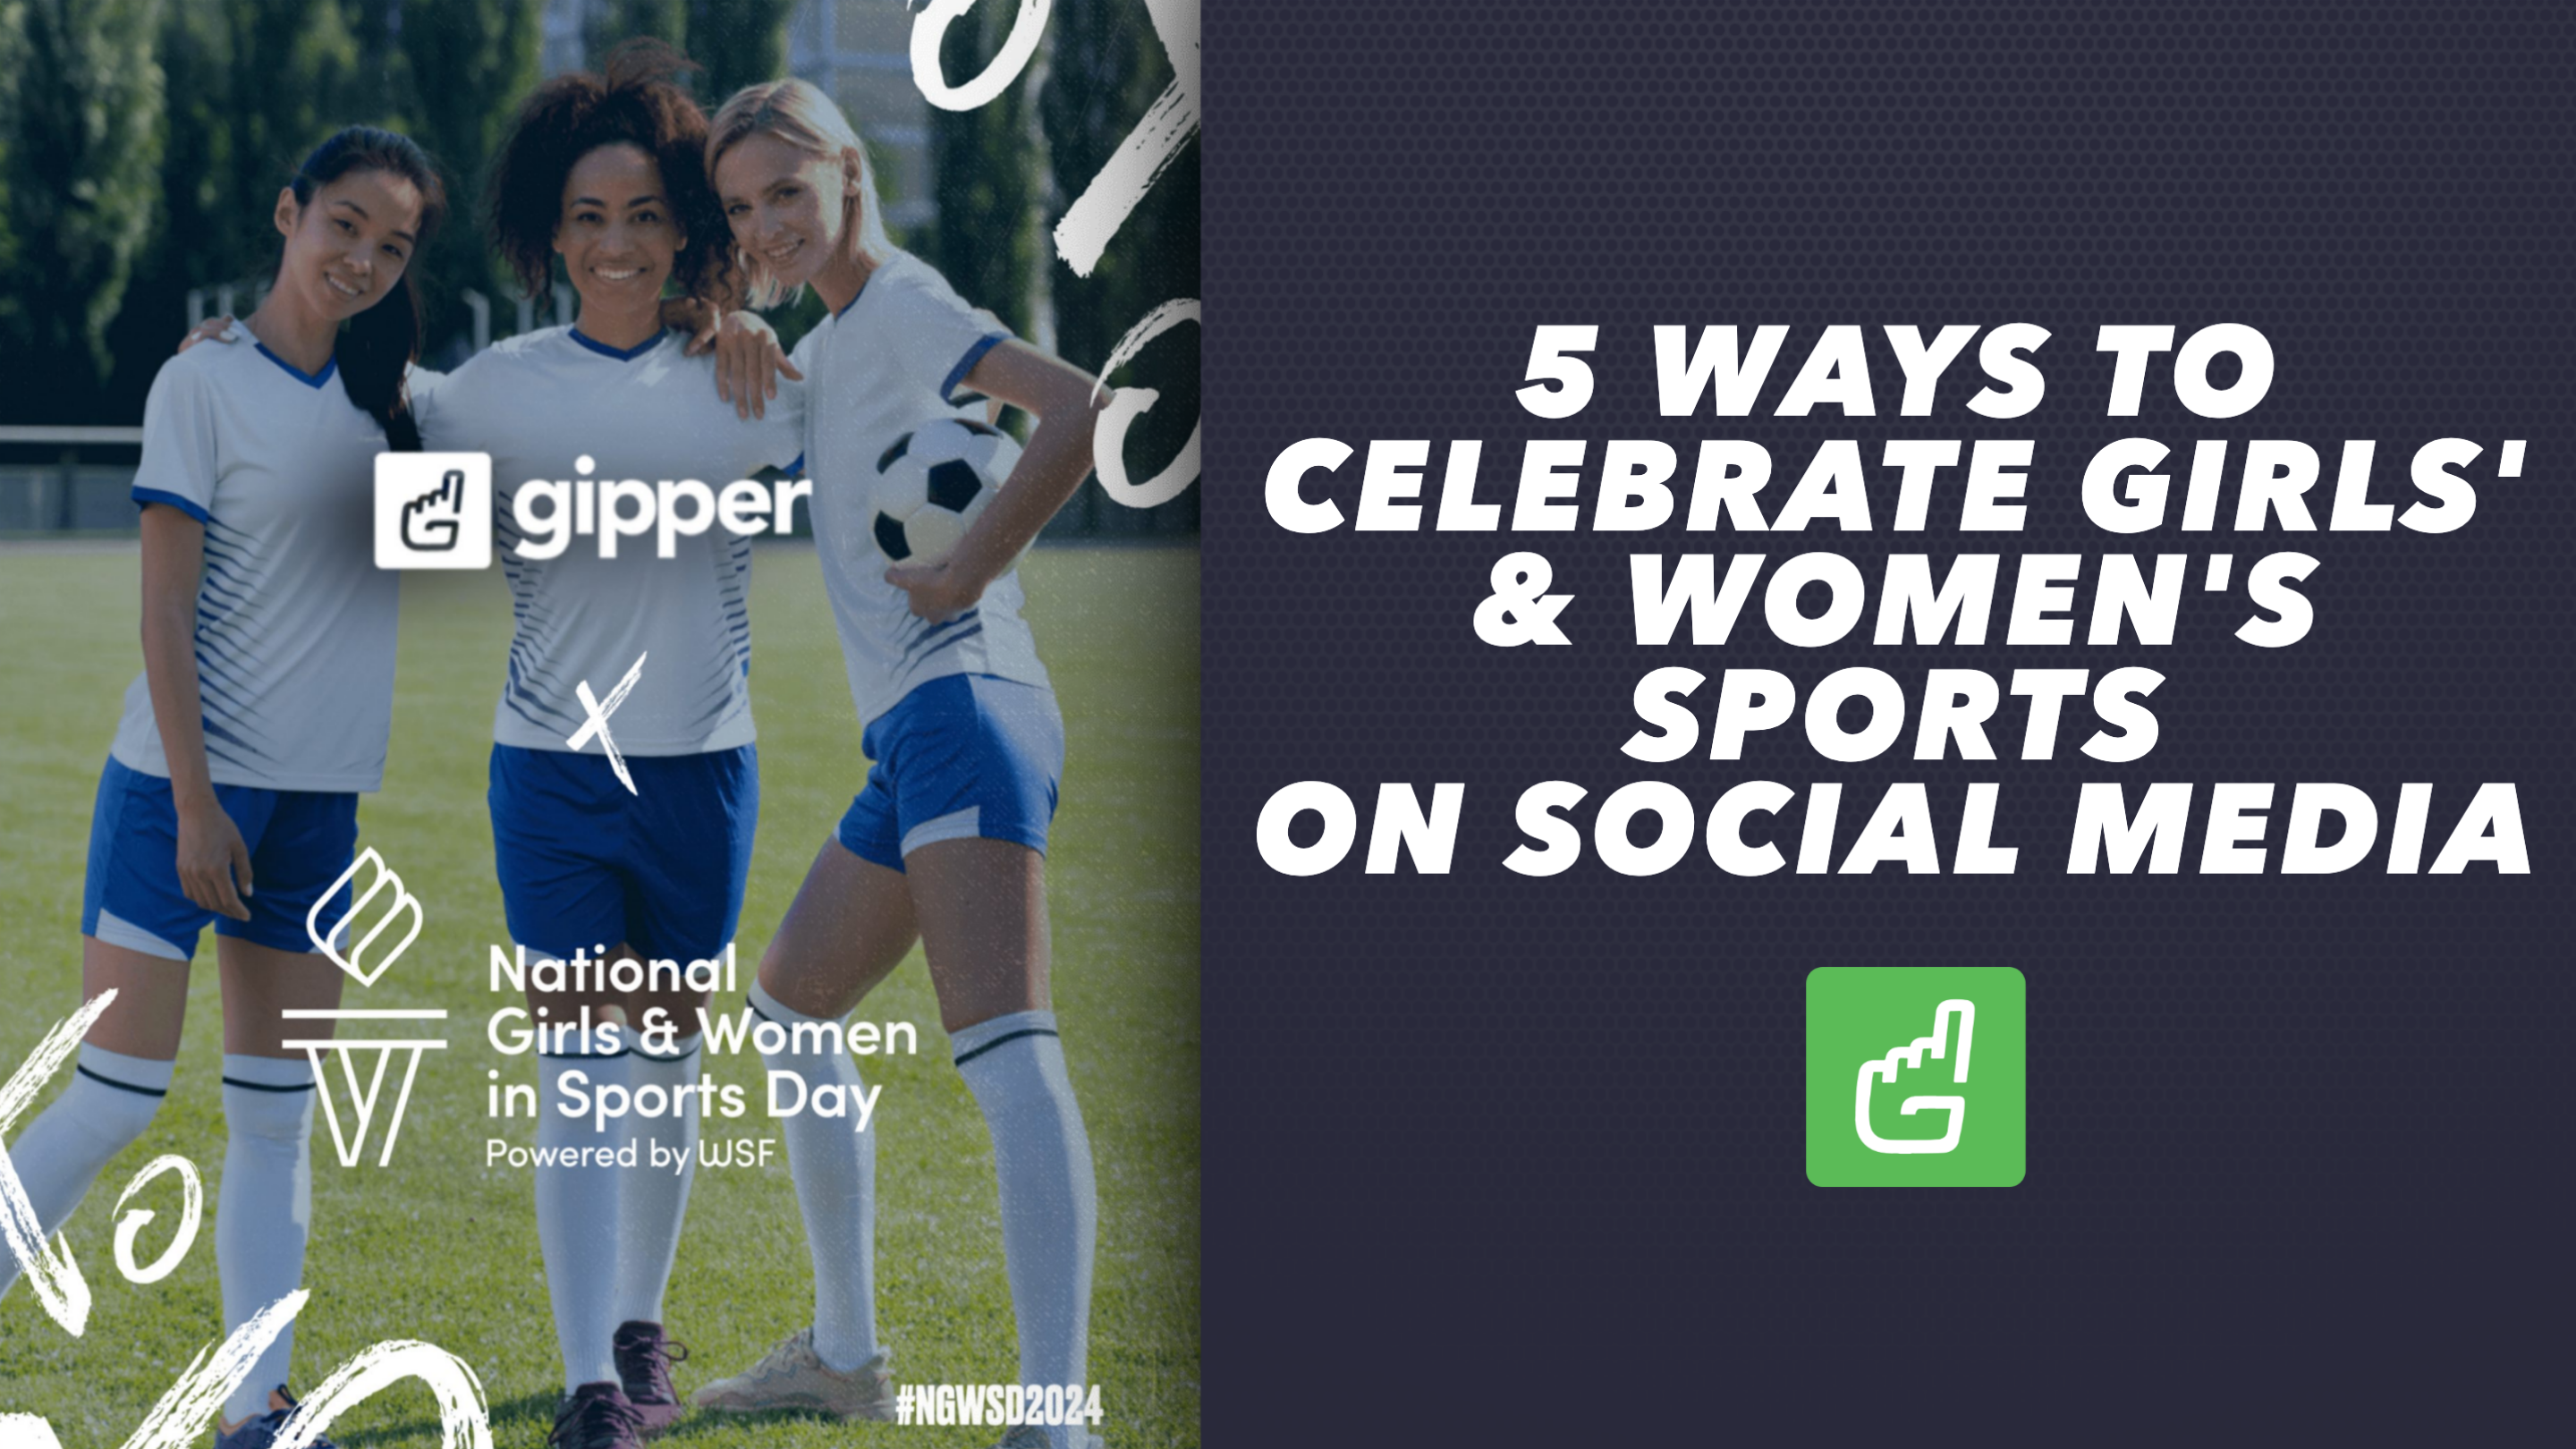 How to Celebrate National Girls & Women in Sports Day on Social Media